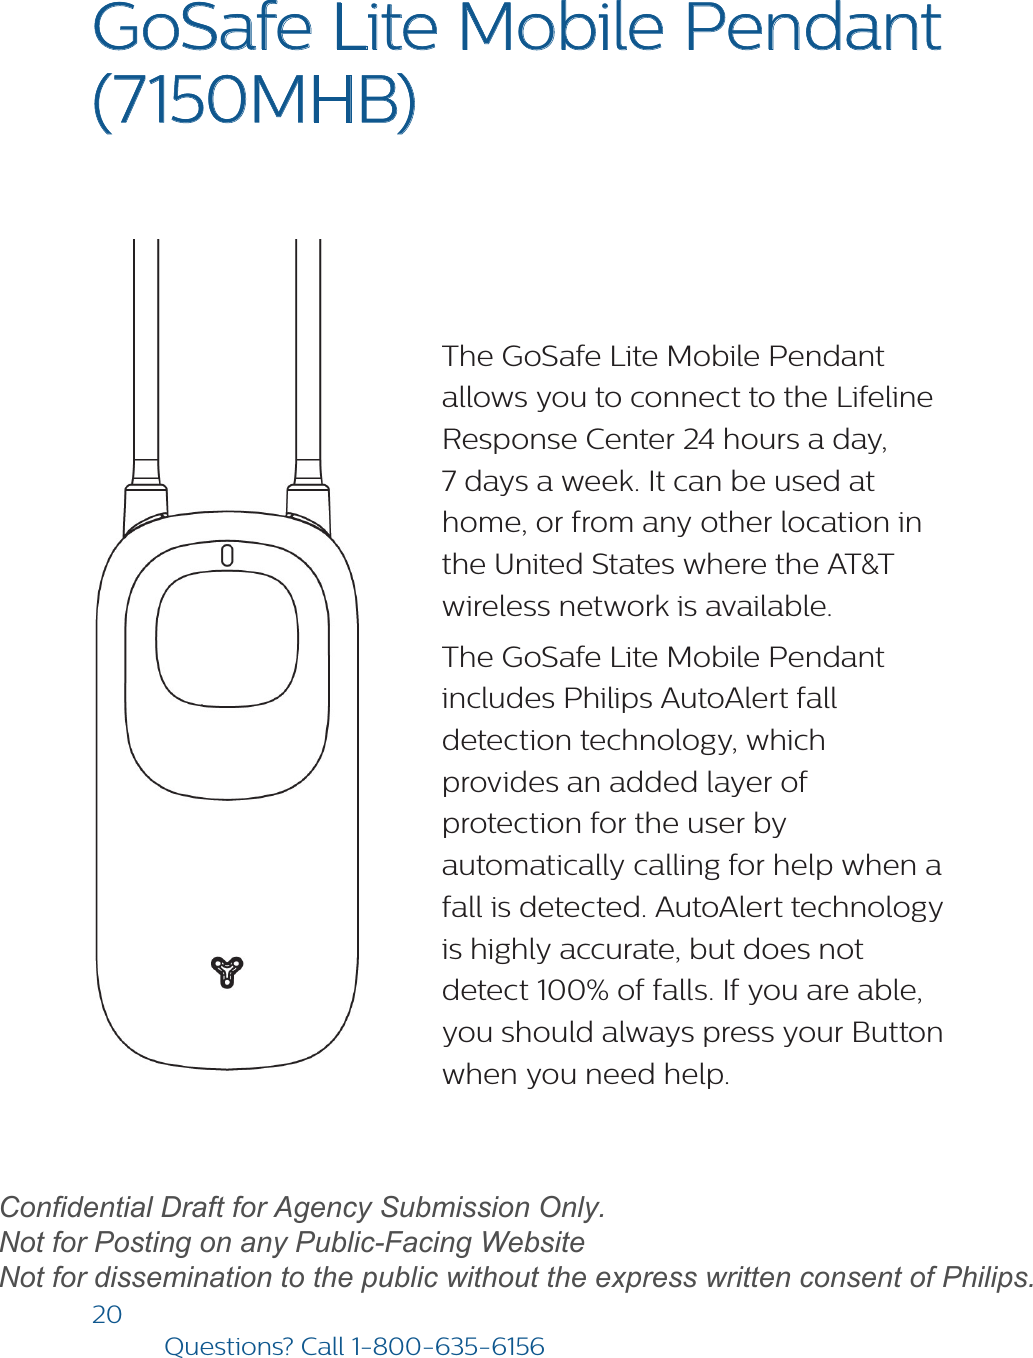 20Questions? Call1-800-635-6156GoSafe Lite Mobile Pendant  (7150MHB) The GoSafe Lite Mobile Pendant allows you to connect to the Lifeline Response Center 24 hours a day, 7 days a week. It can be used at home, or from any other location in the United States where the AT&amp;T wireless network is available.The GoSafe Lite Mobile Pendant includes Philips AutoAlert fall detection technology, which provides an added layer of protection for the user by automatically calling for help when a fall is detected. AutoAlert technology is highly accurate, but does not detect 100% of falls. If you are able, you should always press your Button when you need help. draftConfidential Draft for Agency Submission Only.   Not for Posting on any Public-Facing Website Not for dissemination to the public without the express written consent of Philips.